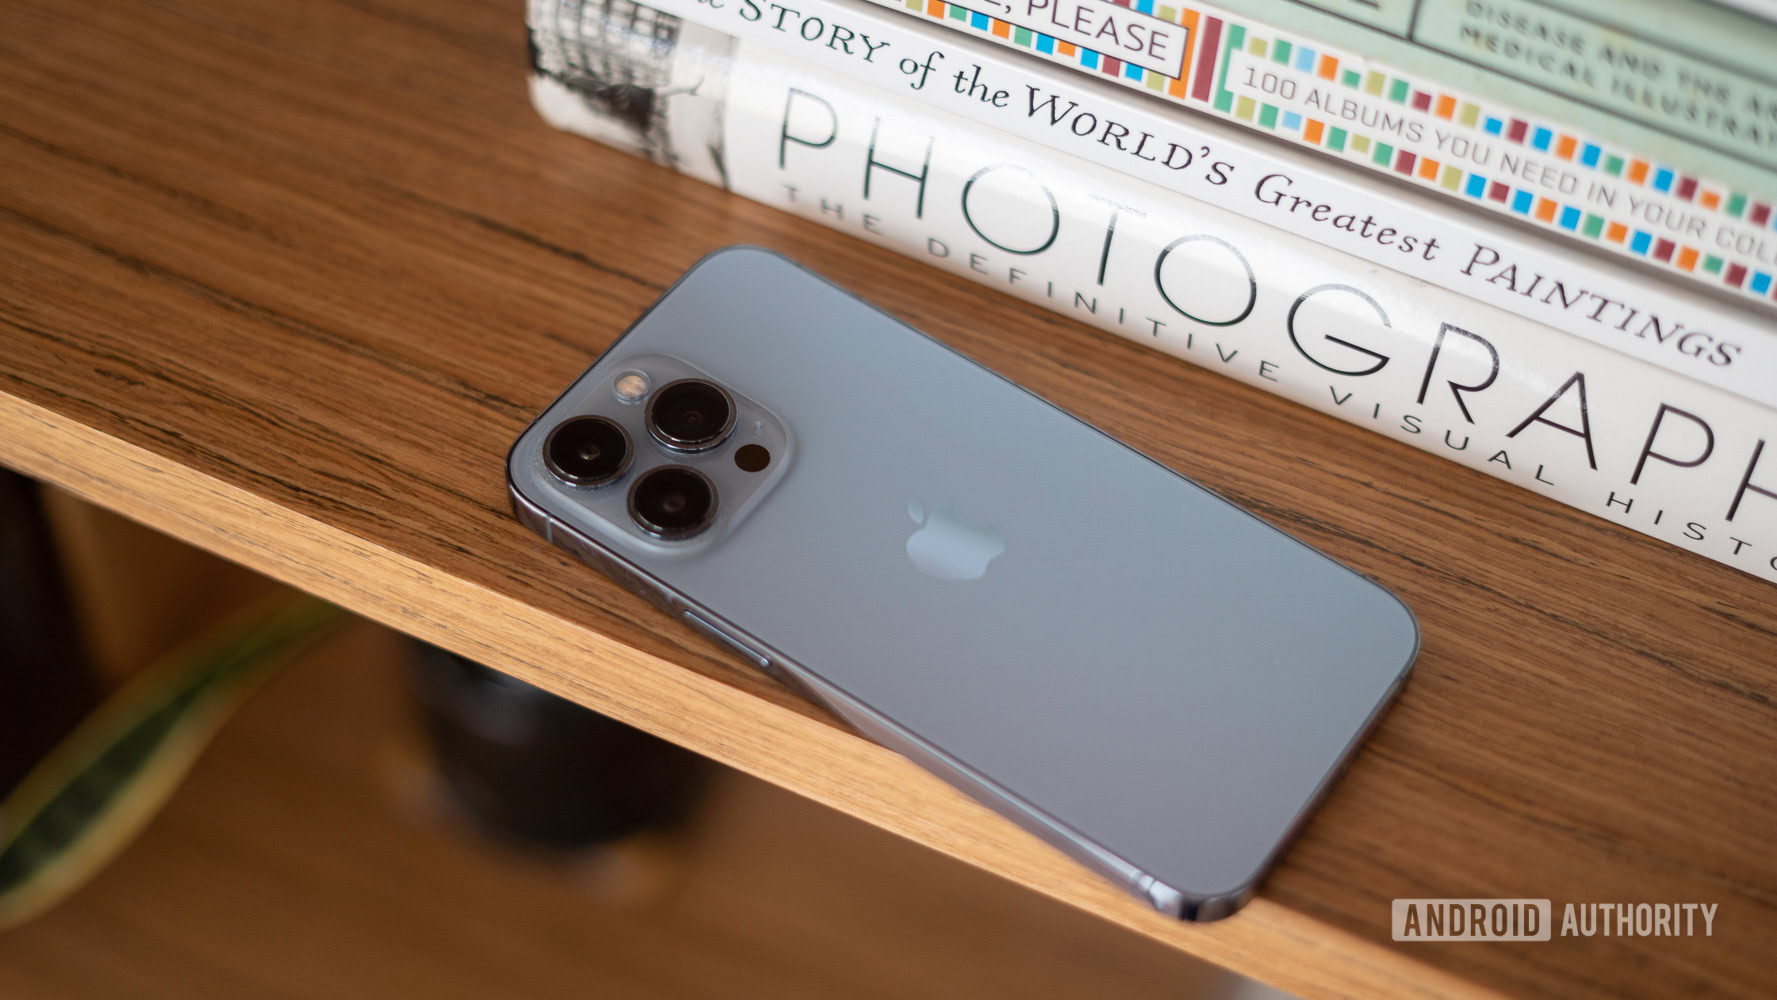 I bought the iPhone 13 Pro Max instead of the iPhone 13 Pro — here's why